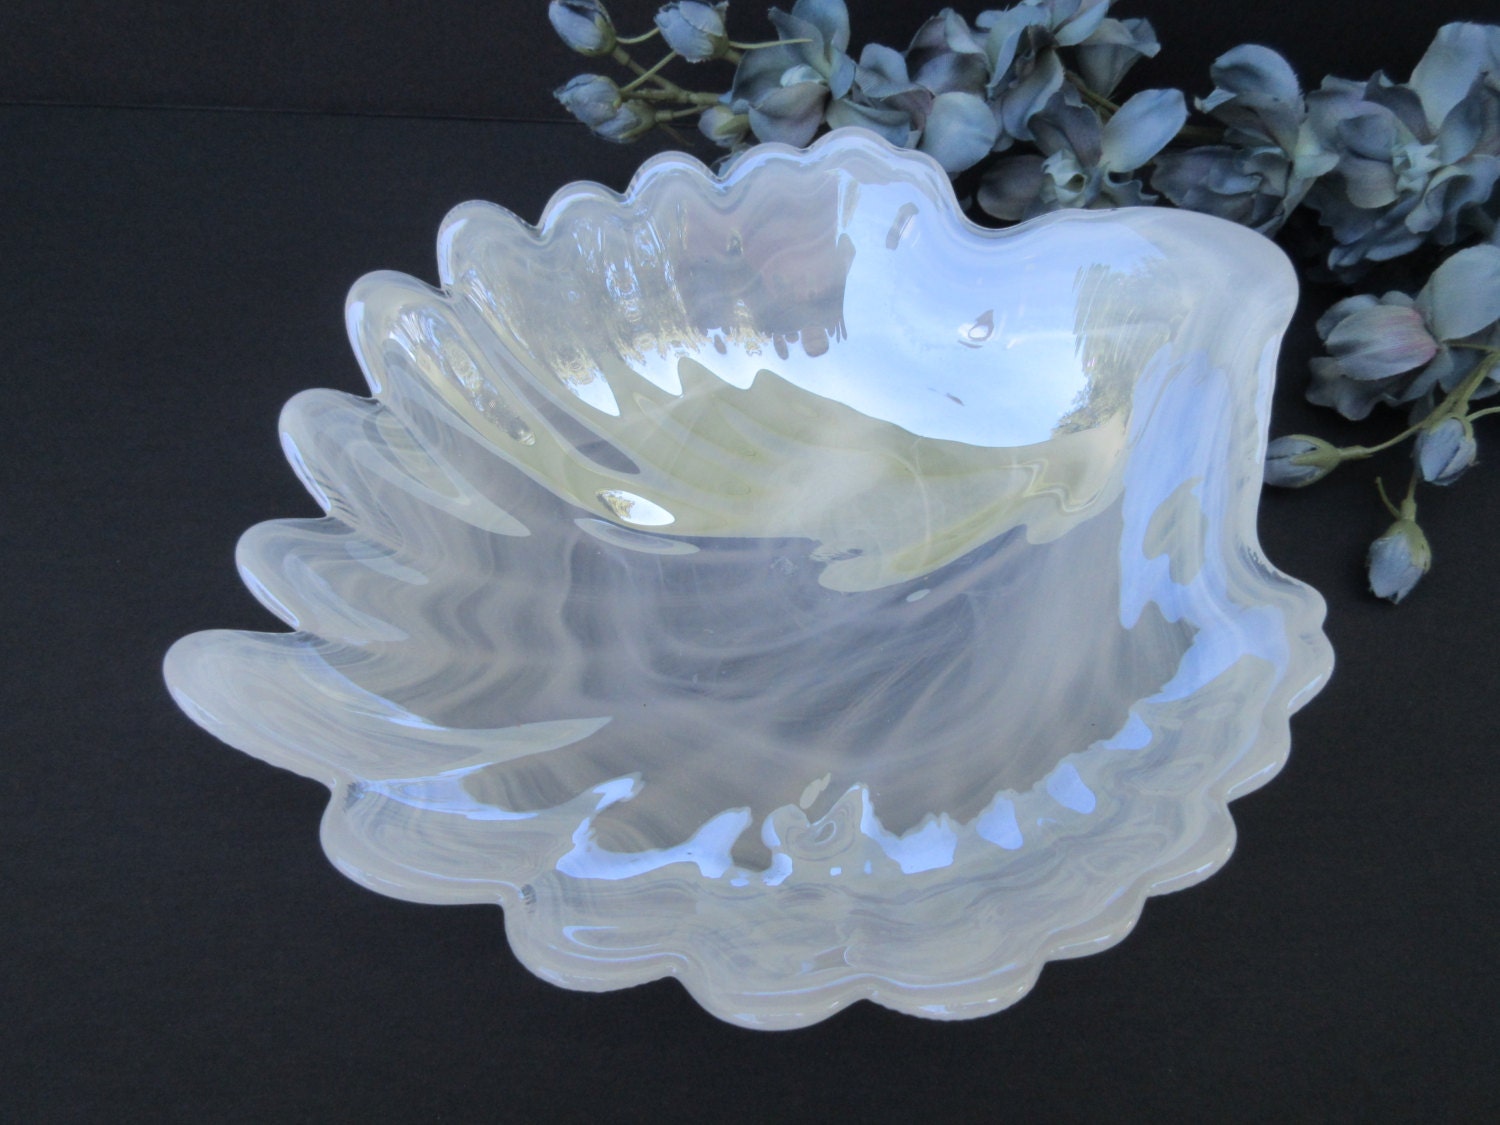 Soap Candy Side Dish Serving Vintage White Iridescent Glass Sea Shell Shaped Footed Bowl Small Vanity Dresser Jewelry